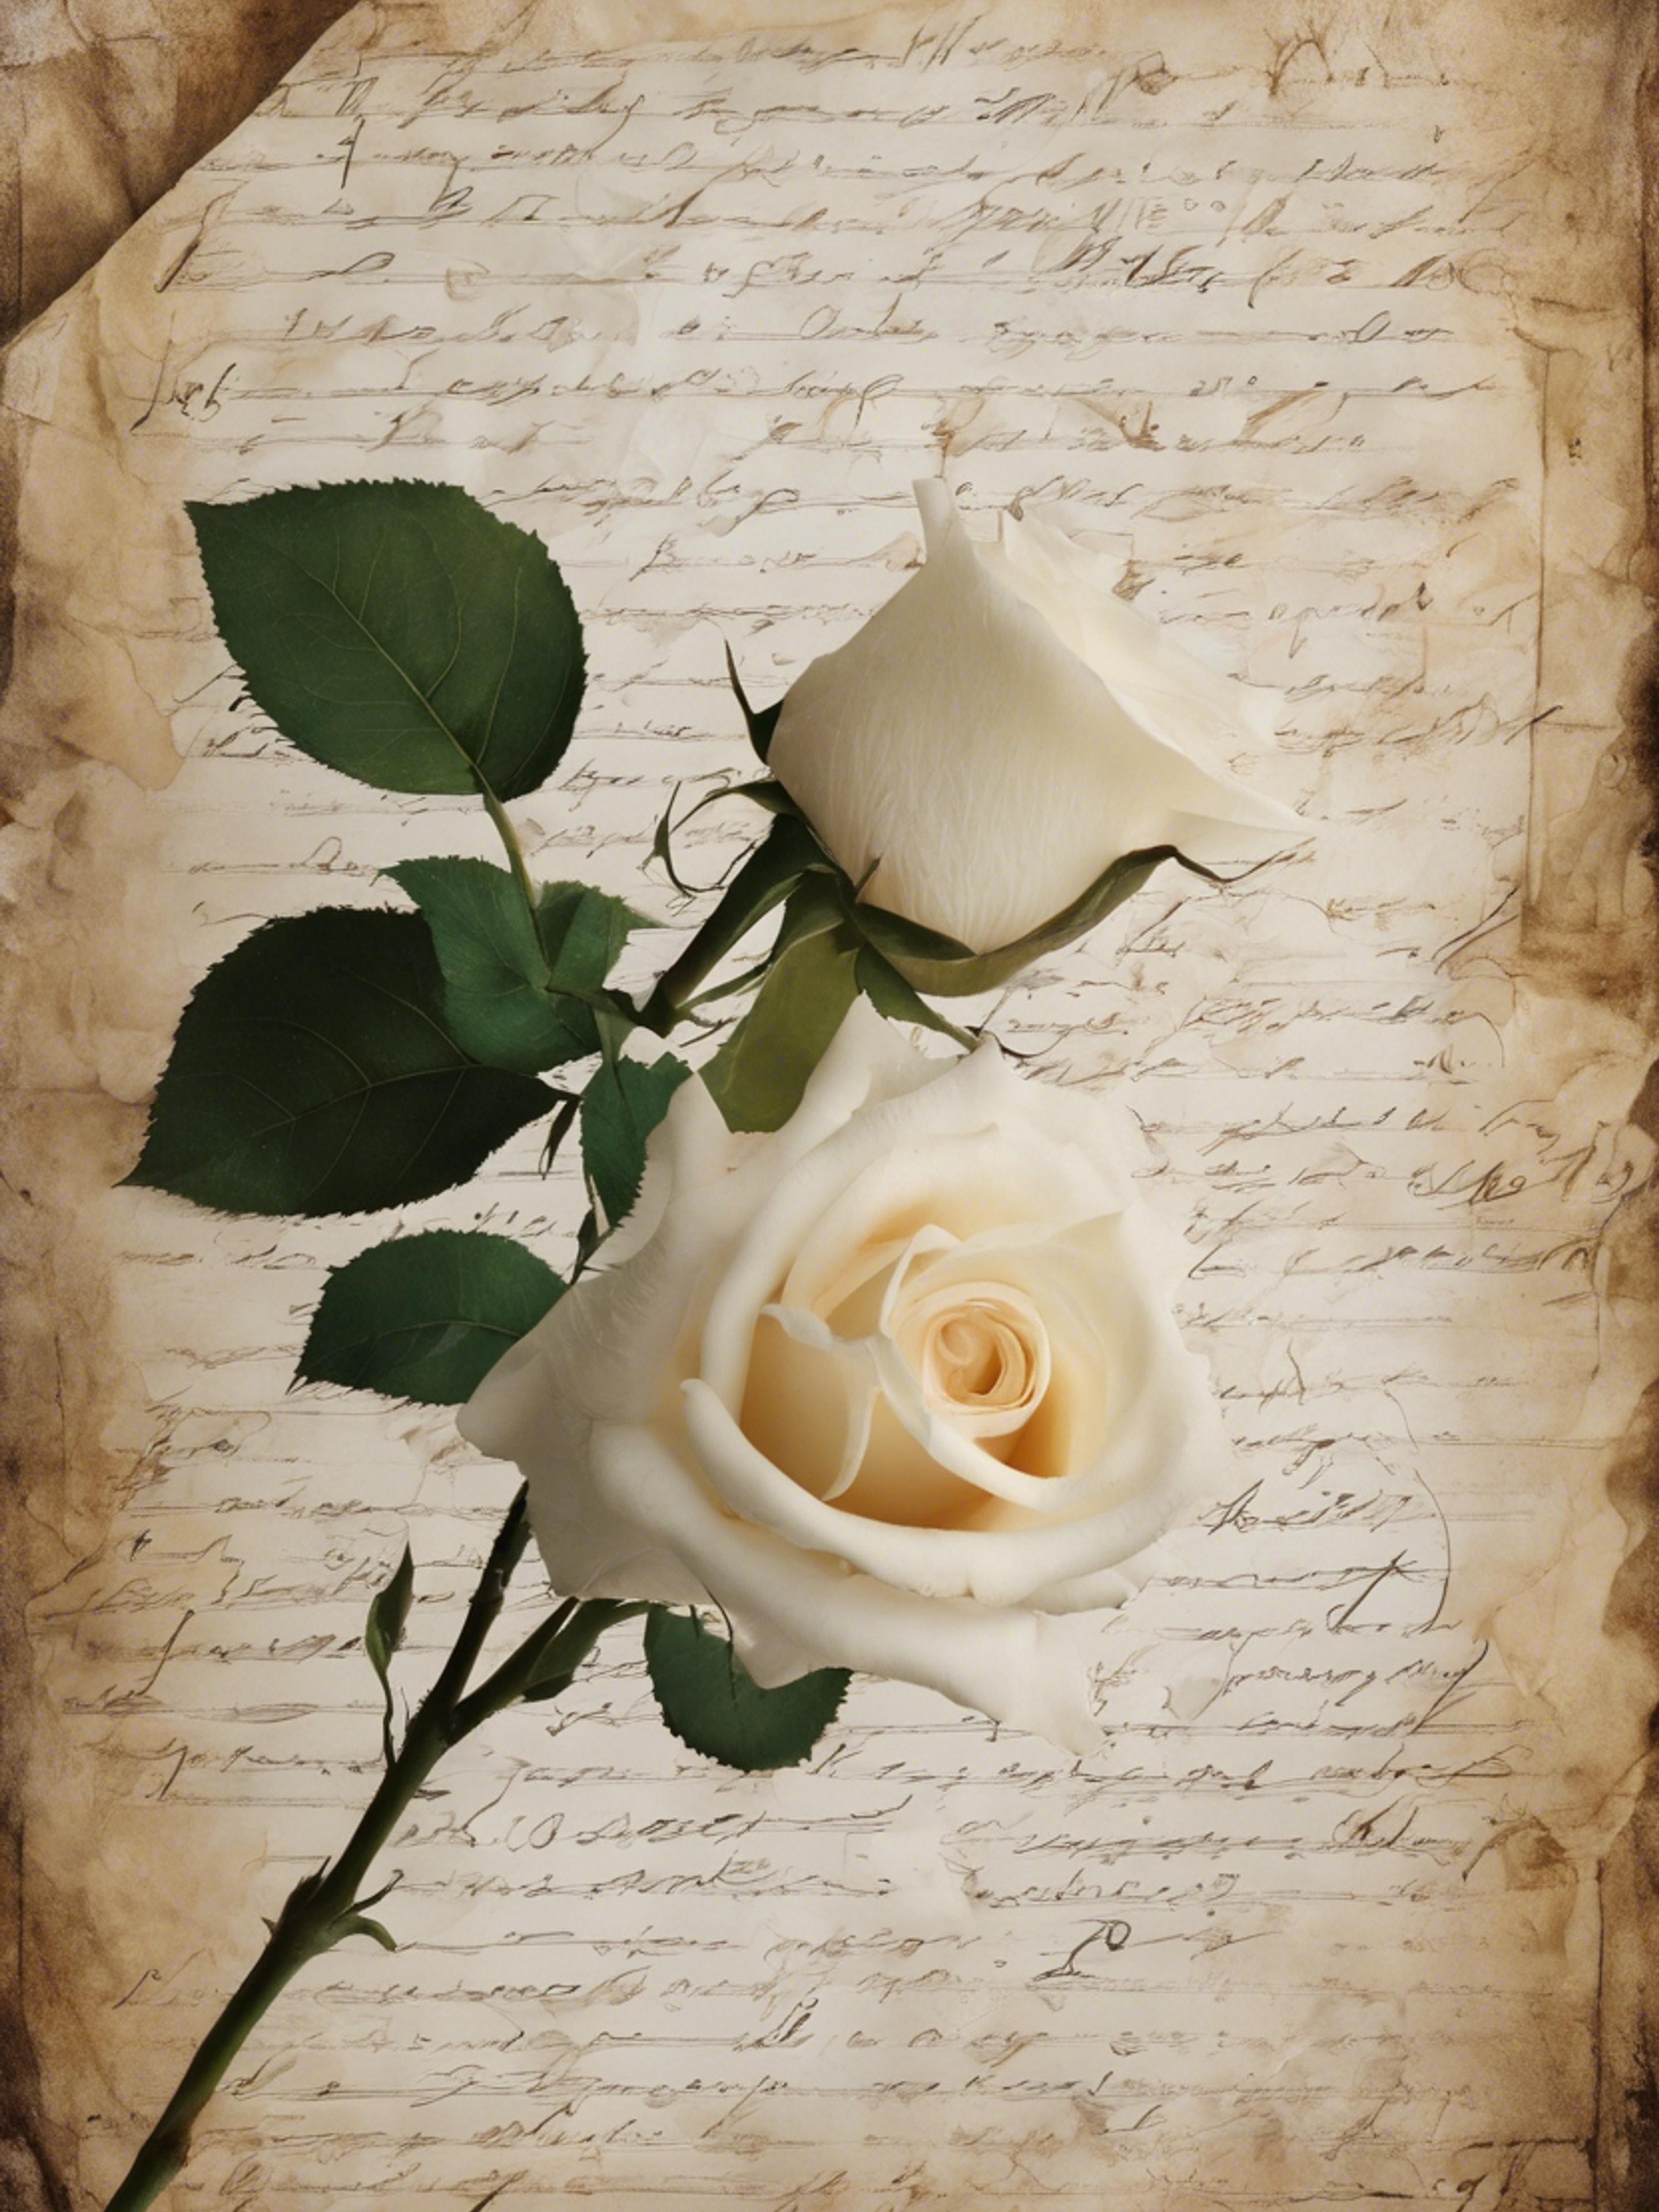 A white rose resting on antique paper with handwritten love letters.壁紙[bf648c50ed604fe9bd1f]